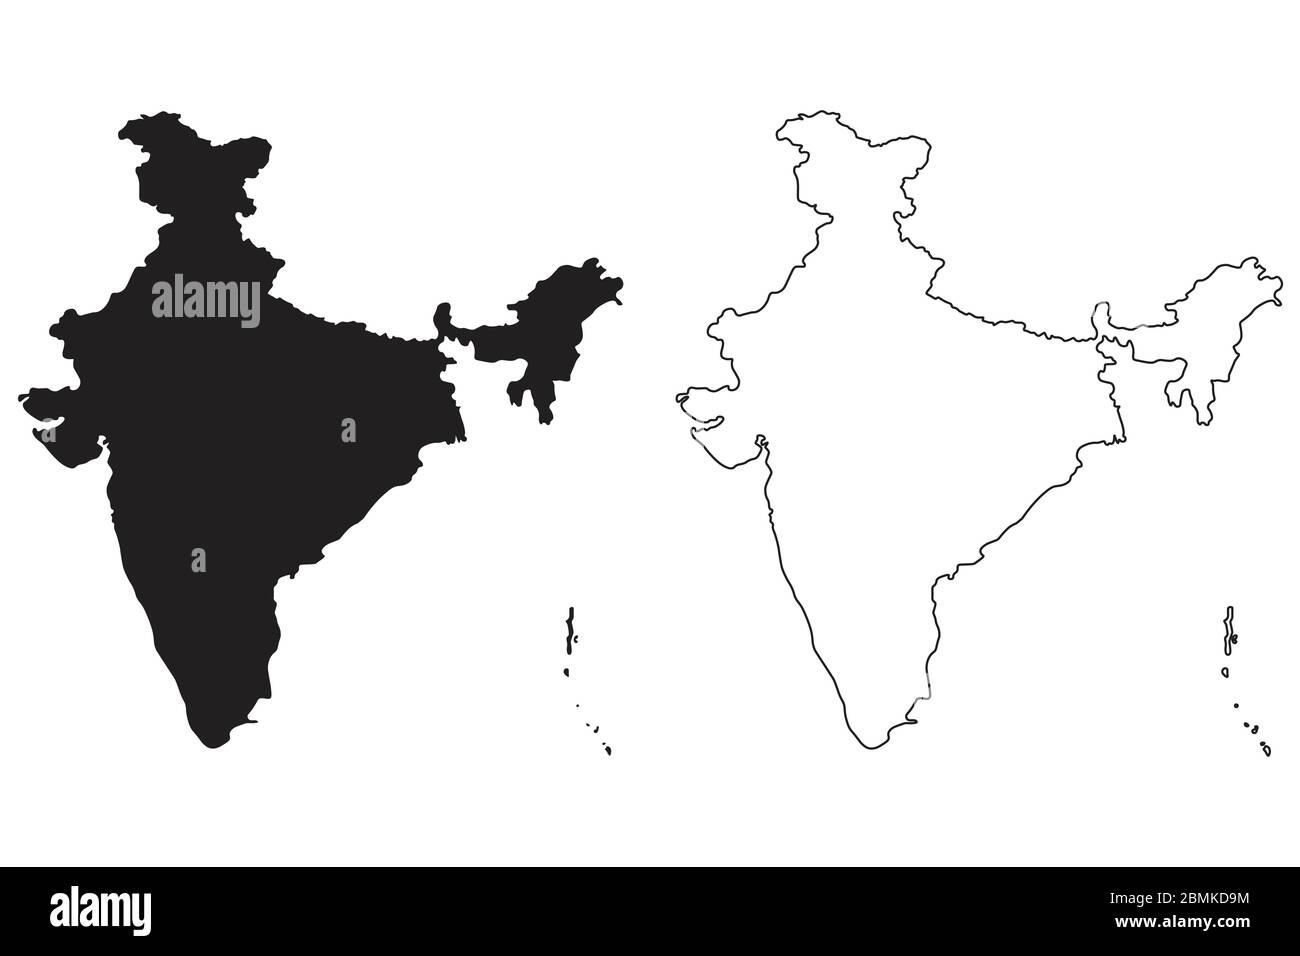 India Country Map. Black silhouette and outline isolated on white background. EPS Vector Stock Vector